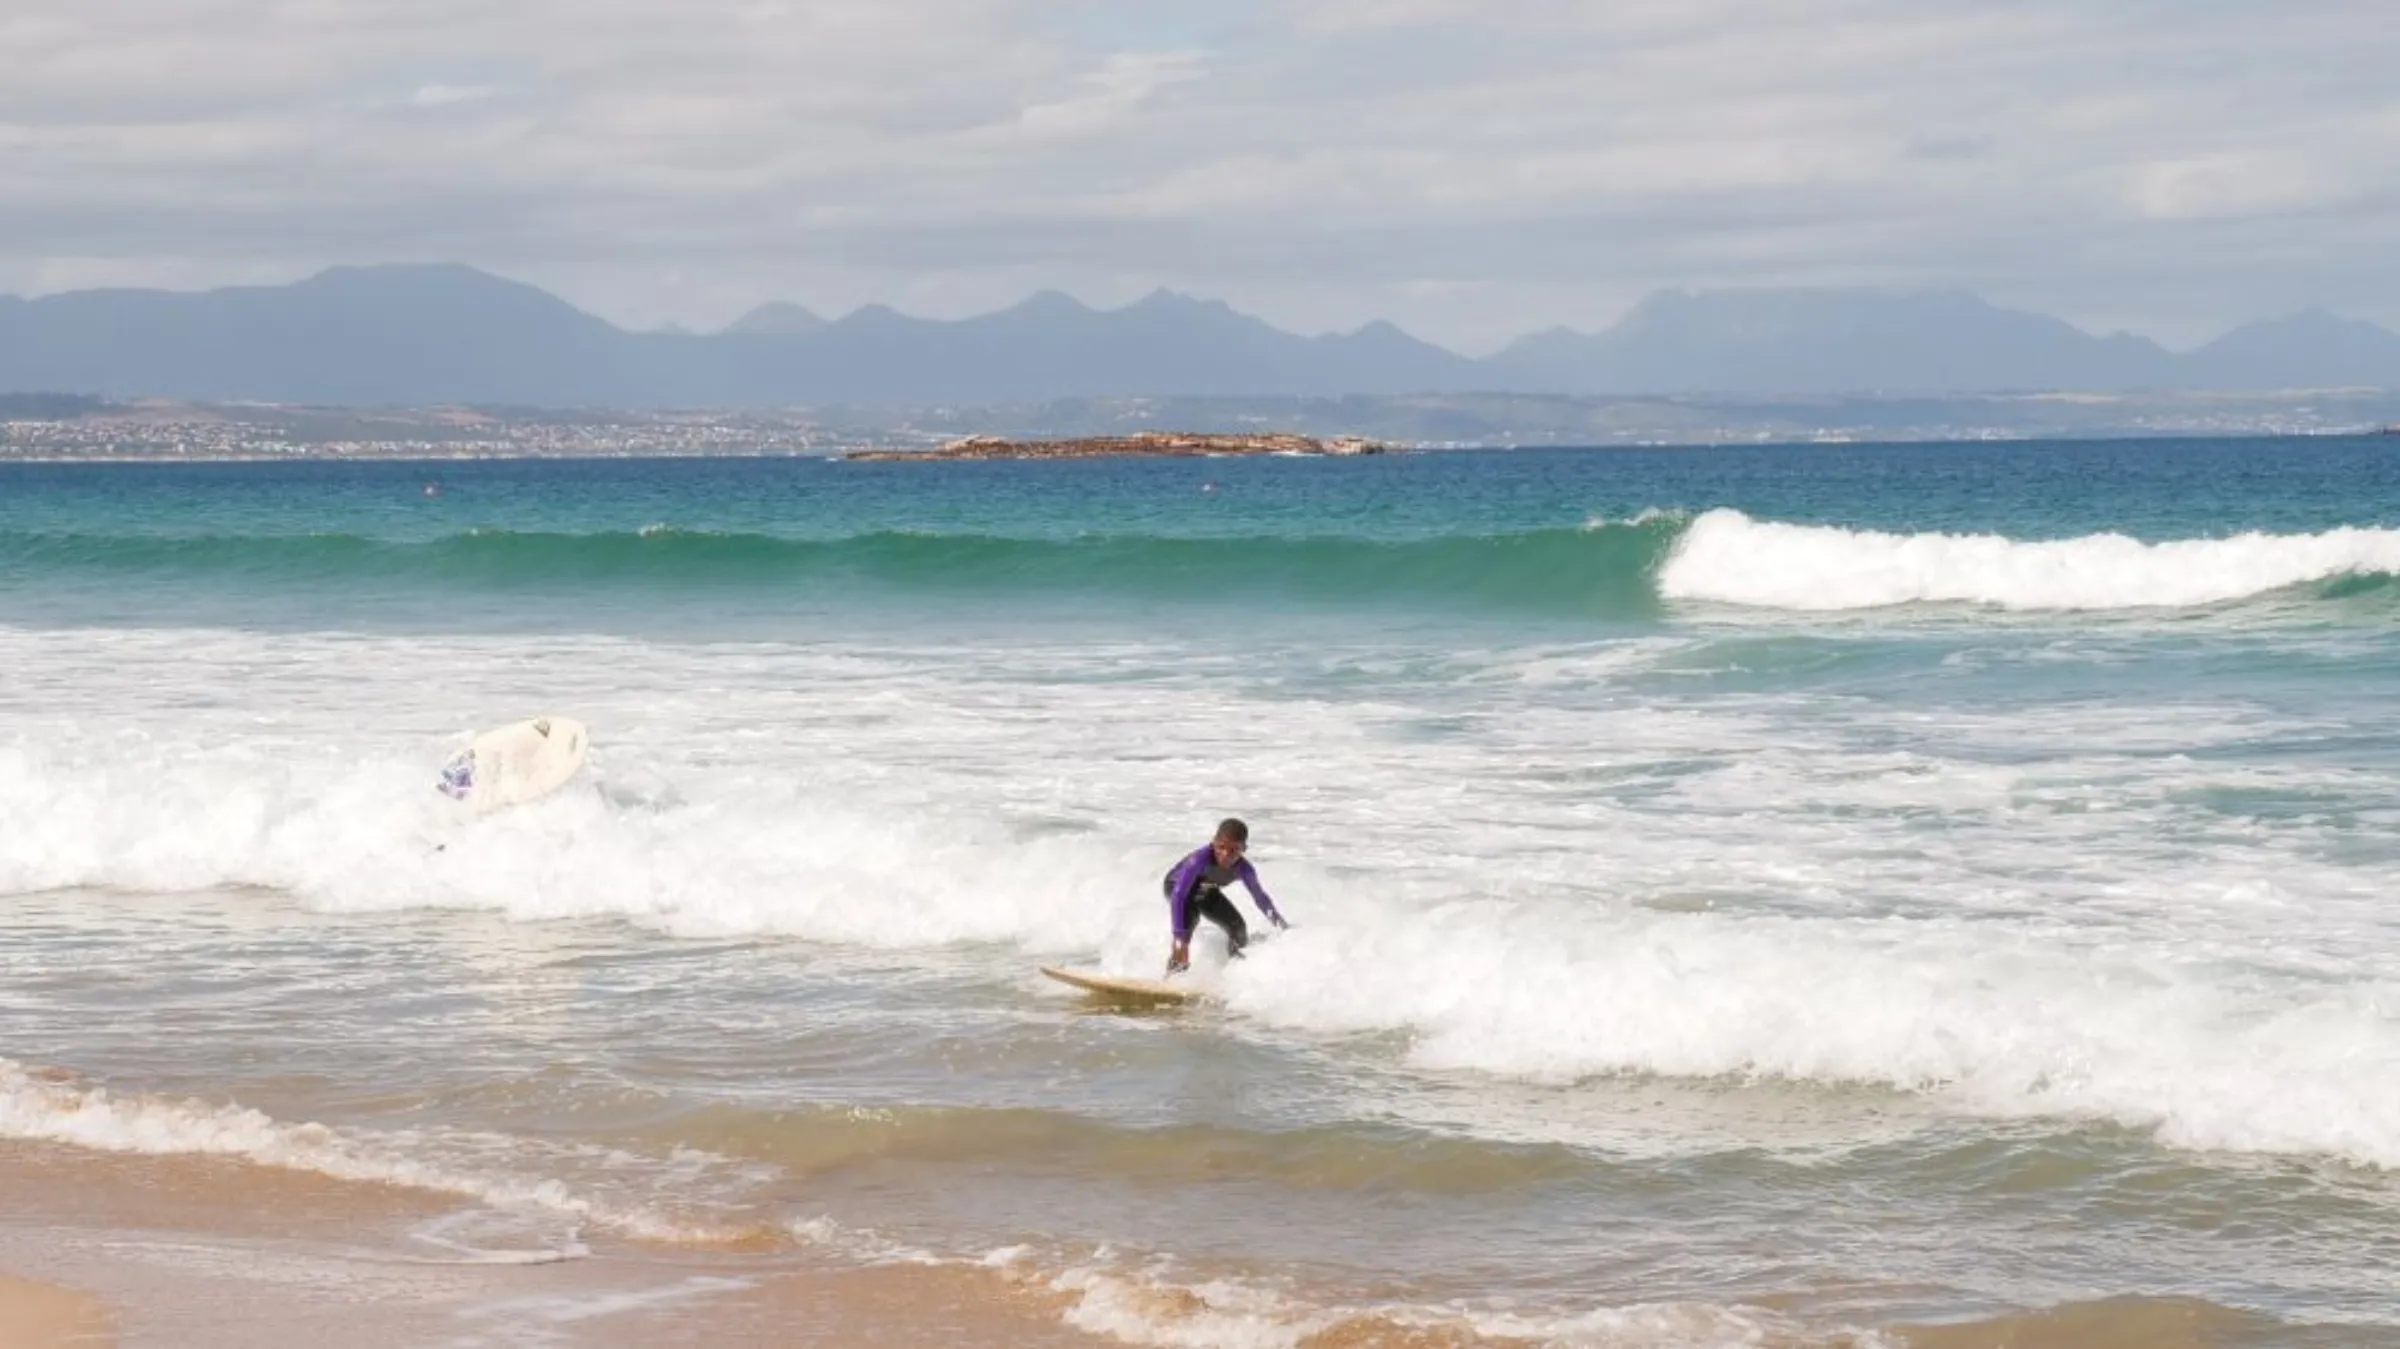 A student of The Surfer Kids charity catches a wave with the city and mountains seen behind him in the background in Mossel Bay, South Africa, November 25, 2022